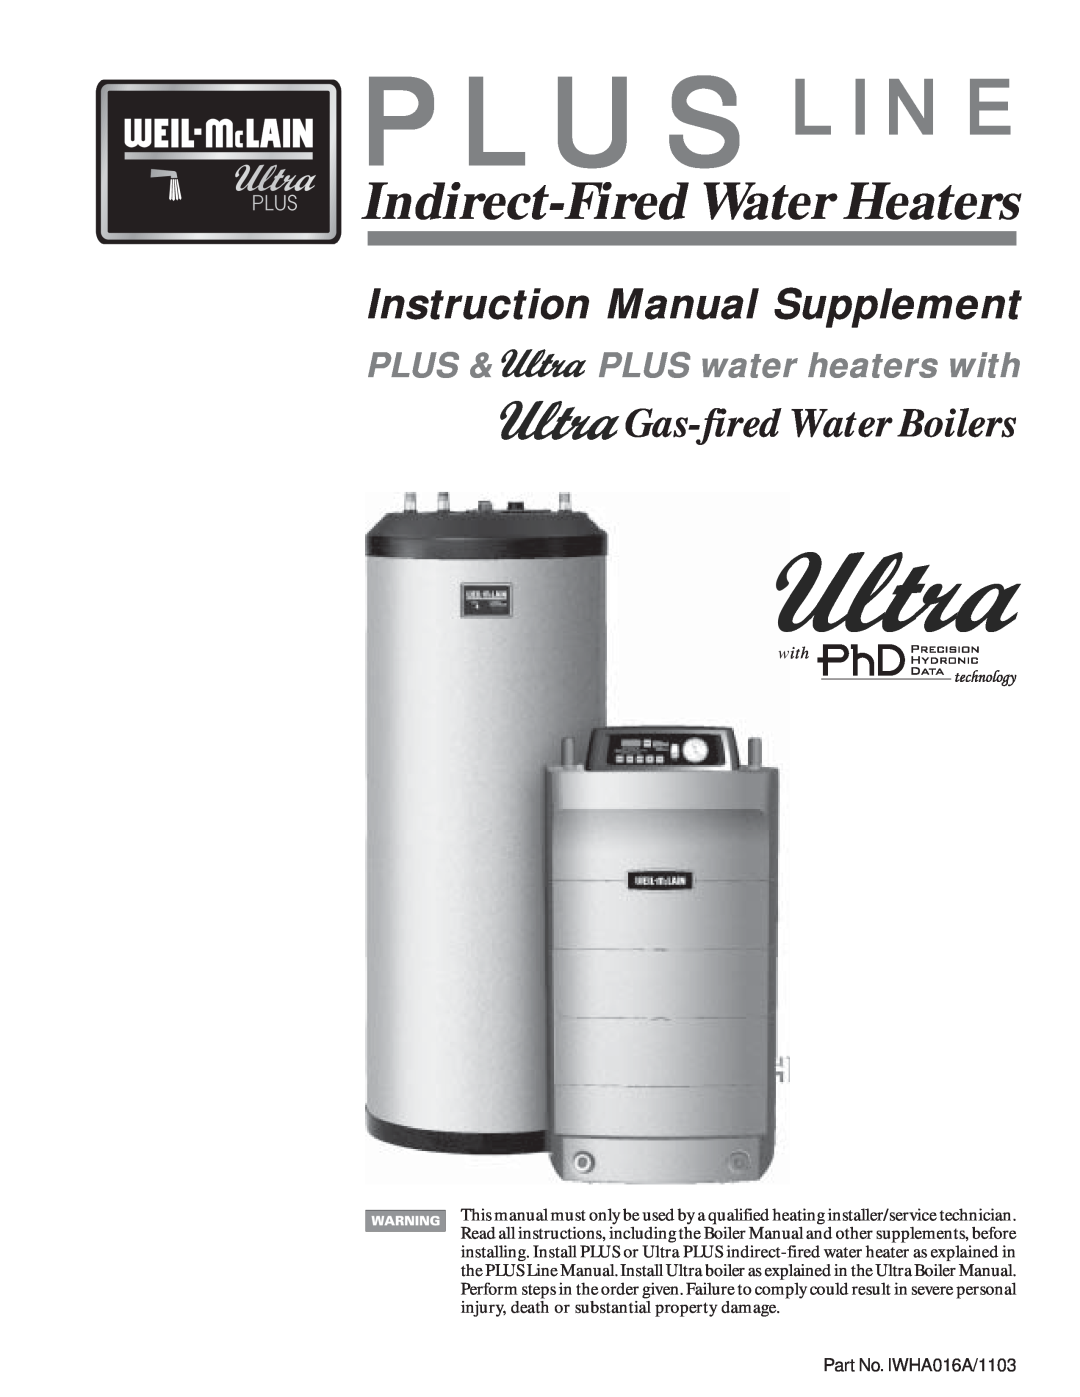 Weil-McLain Electric Water Heater instruction manual Plus Line, Indirect-Fired Water Heaters, Gas-fired Water Boilers 